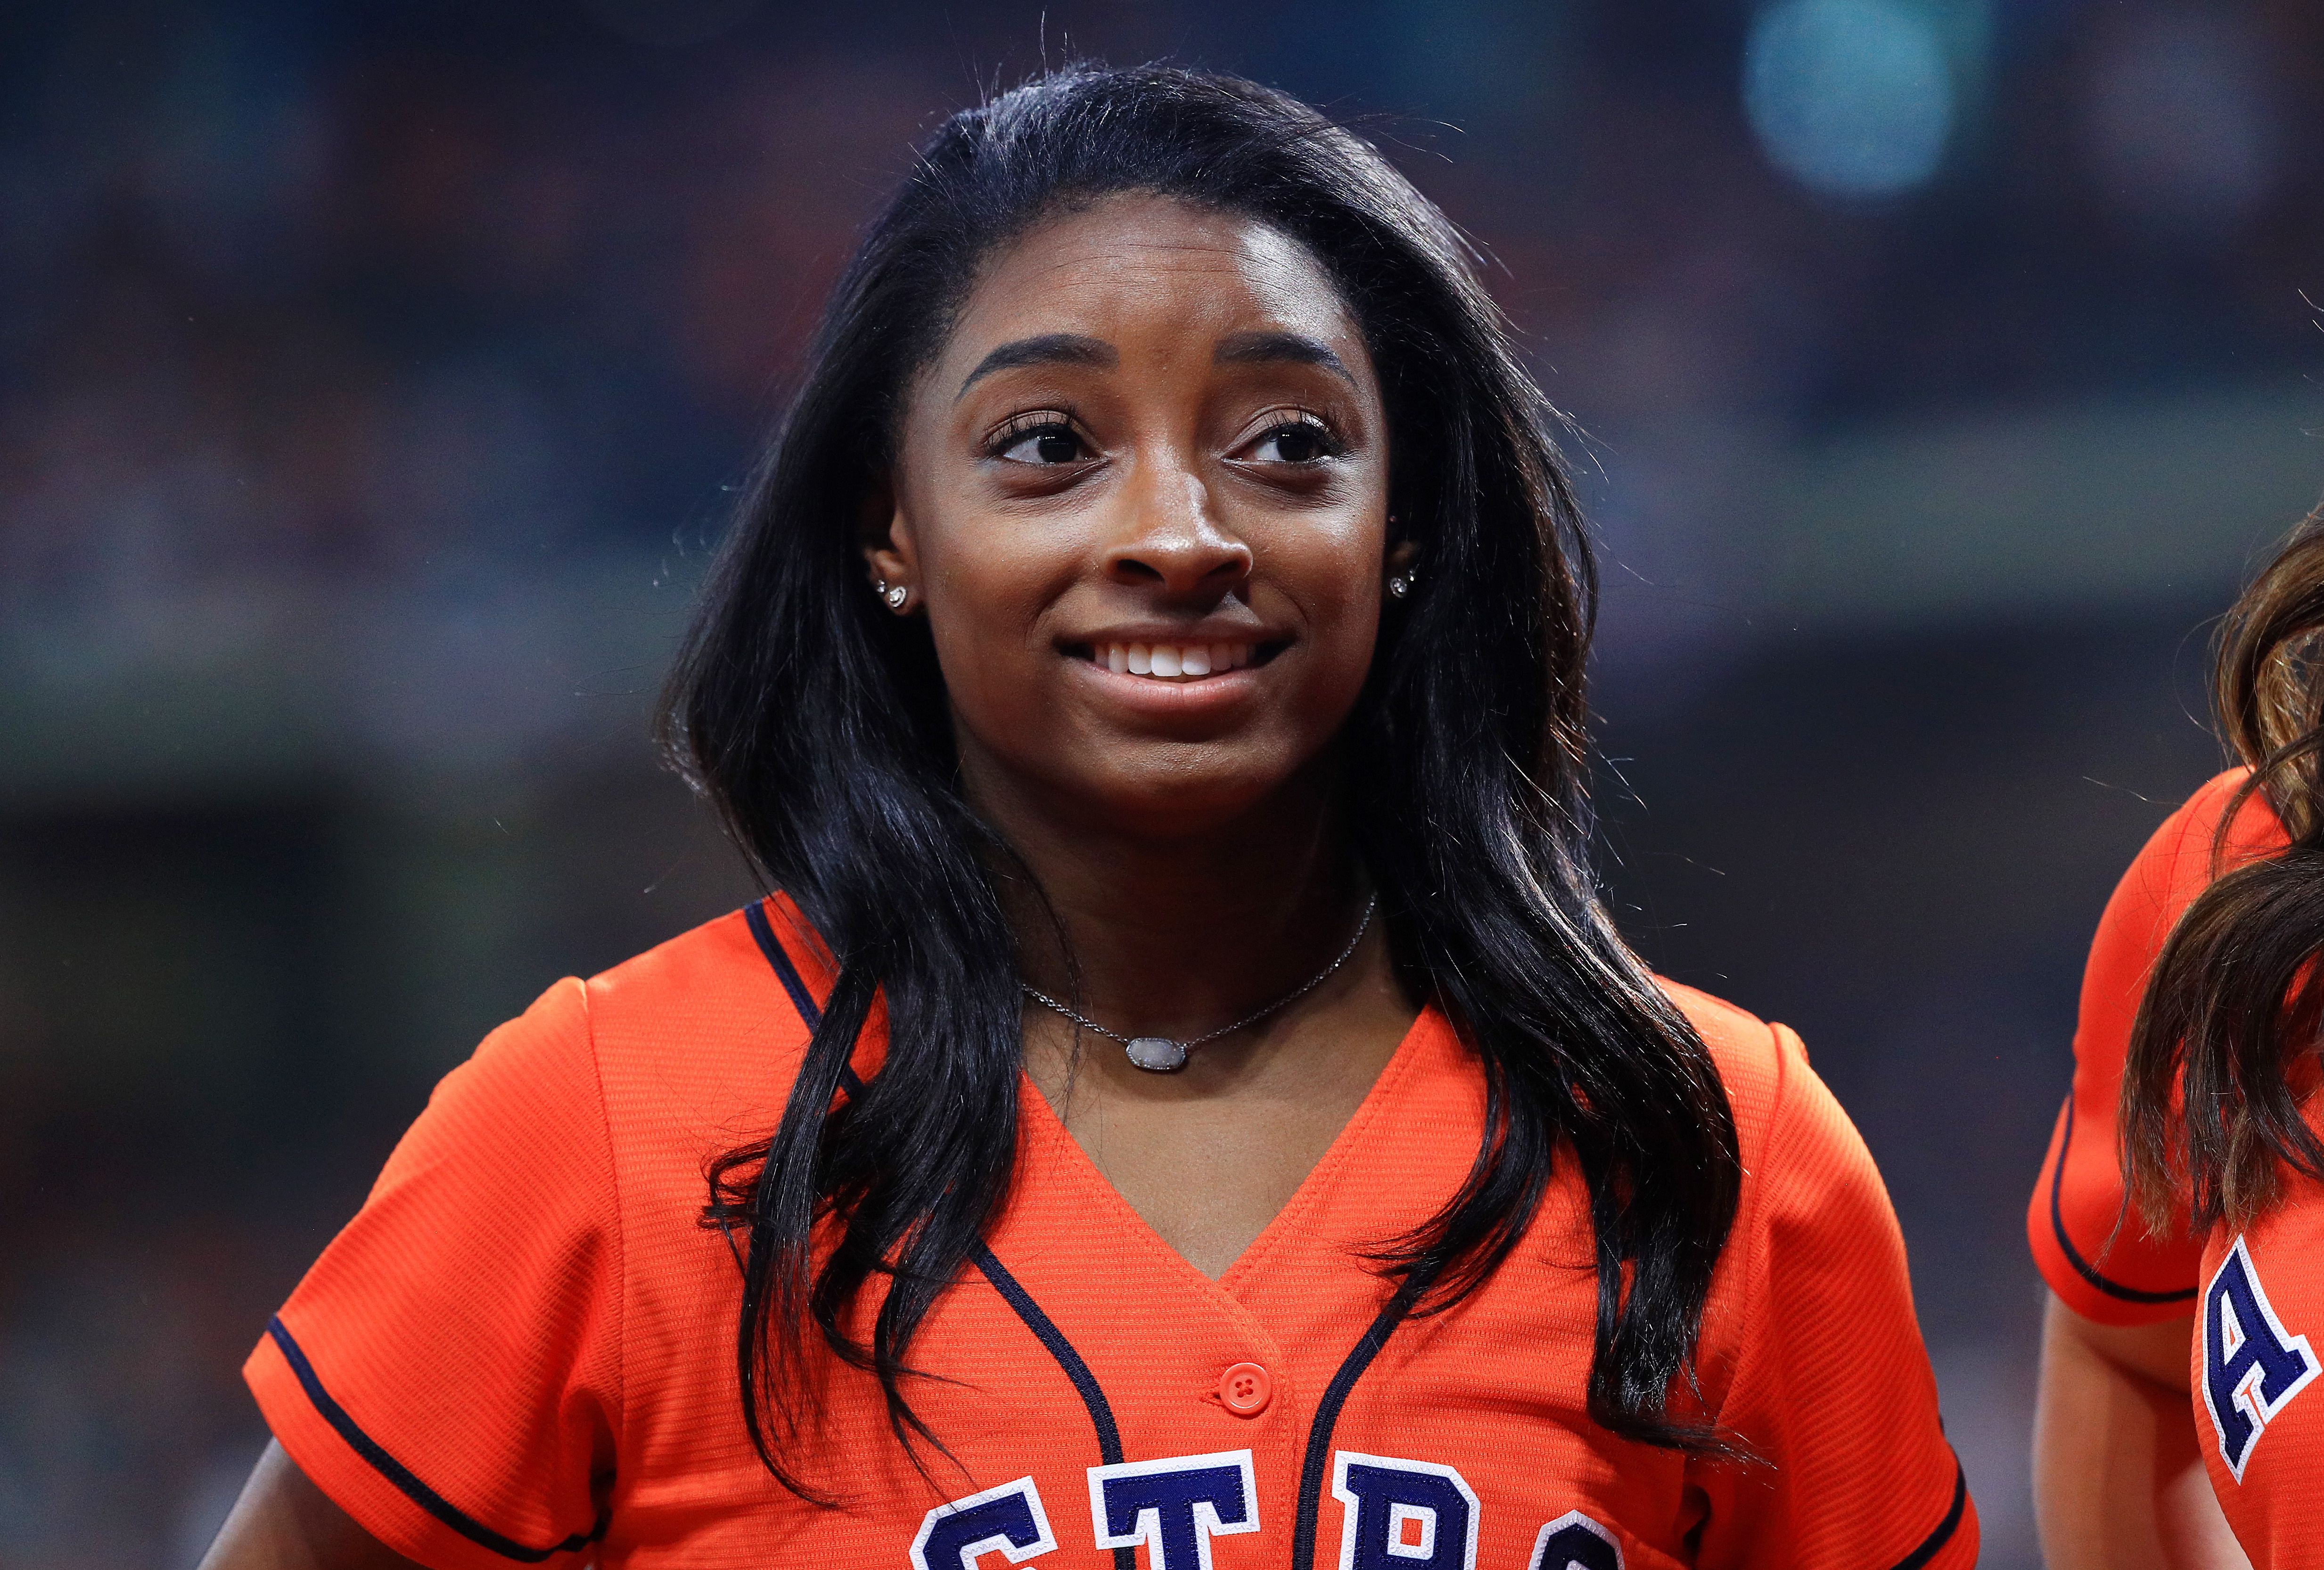 Simone Biles at a game between the Houston Astros and the Washington Nationals on October 23, 2019 | Photo: Getty Images